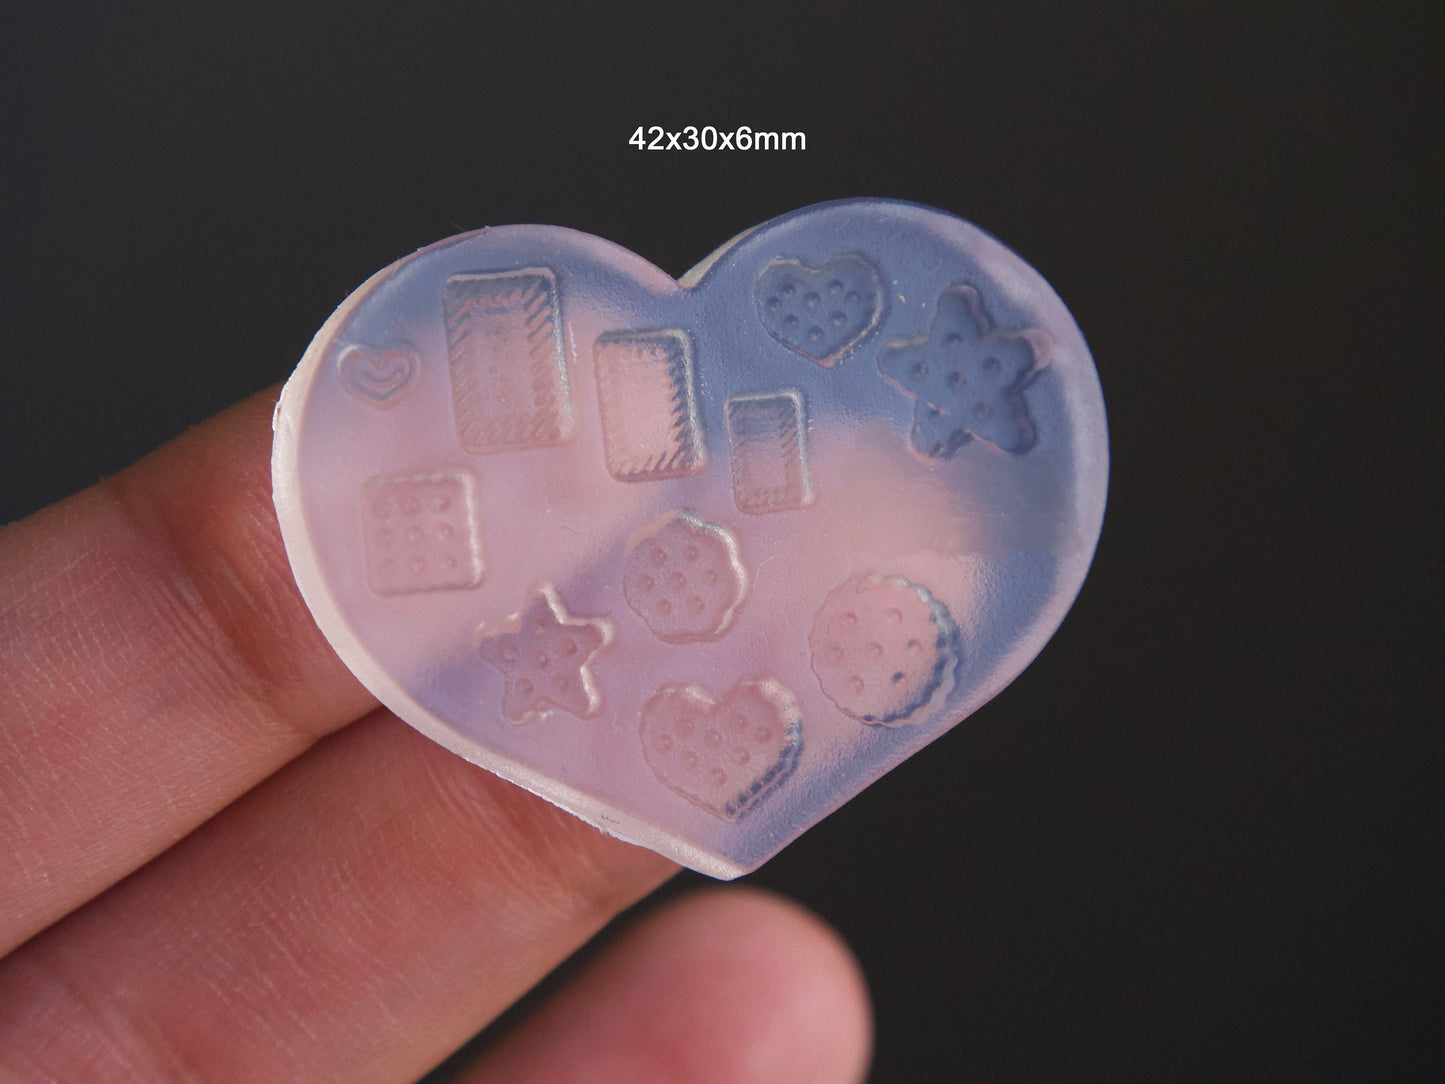 3D Cookie Mould for Nail Art DIY Decal Design